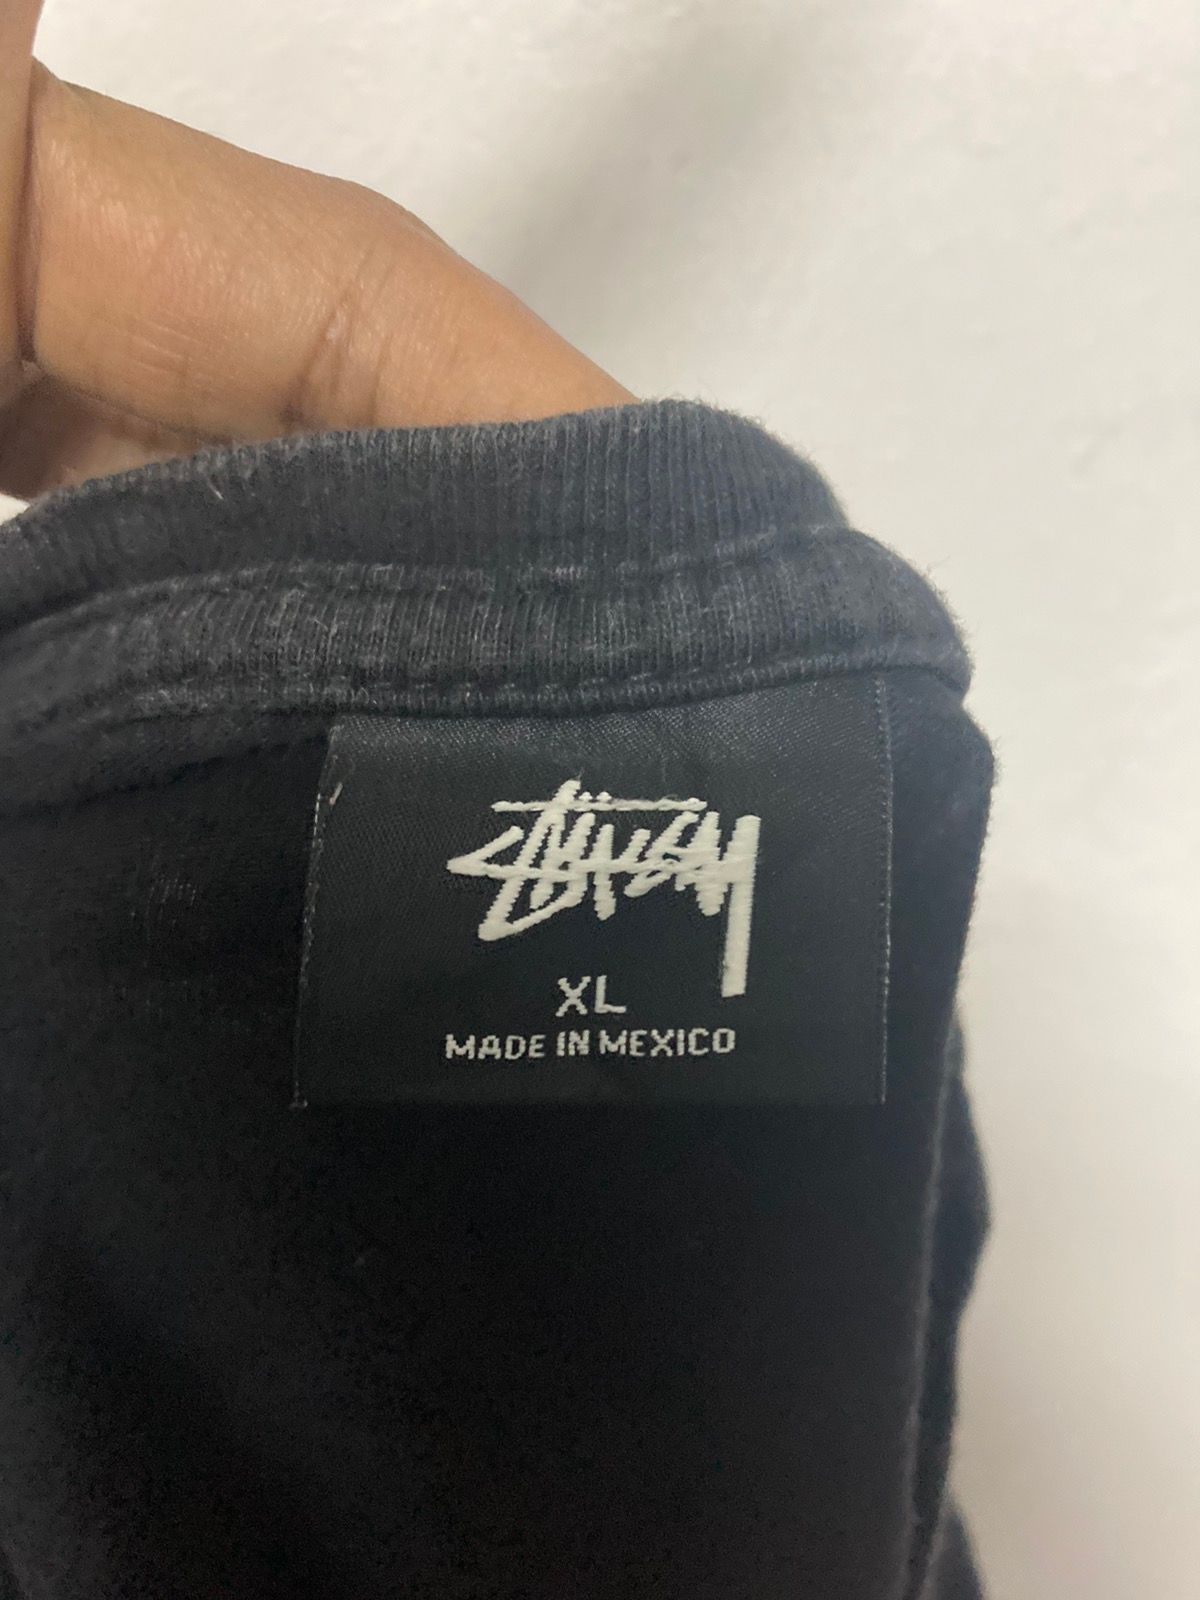 Stussy Tour Shirt For Women in XL size - 11